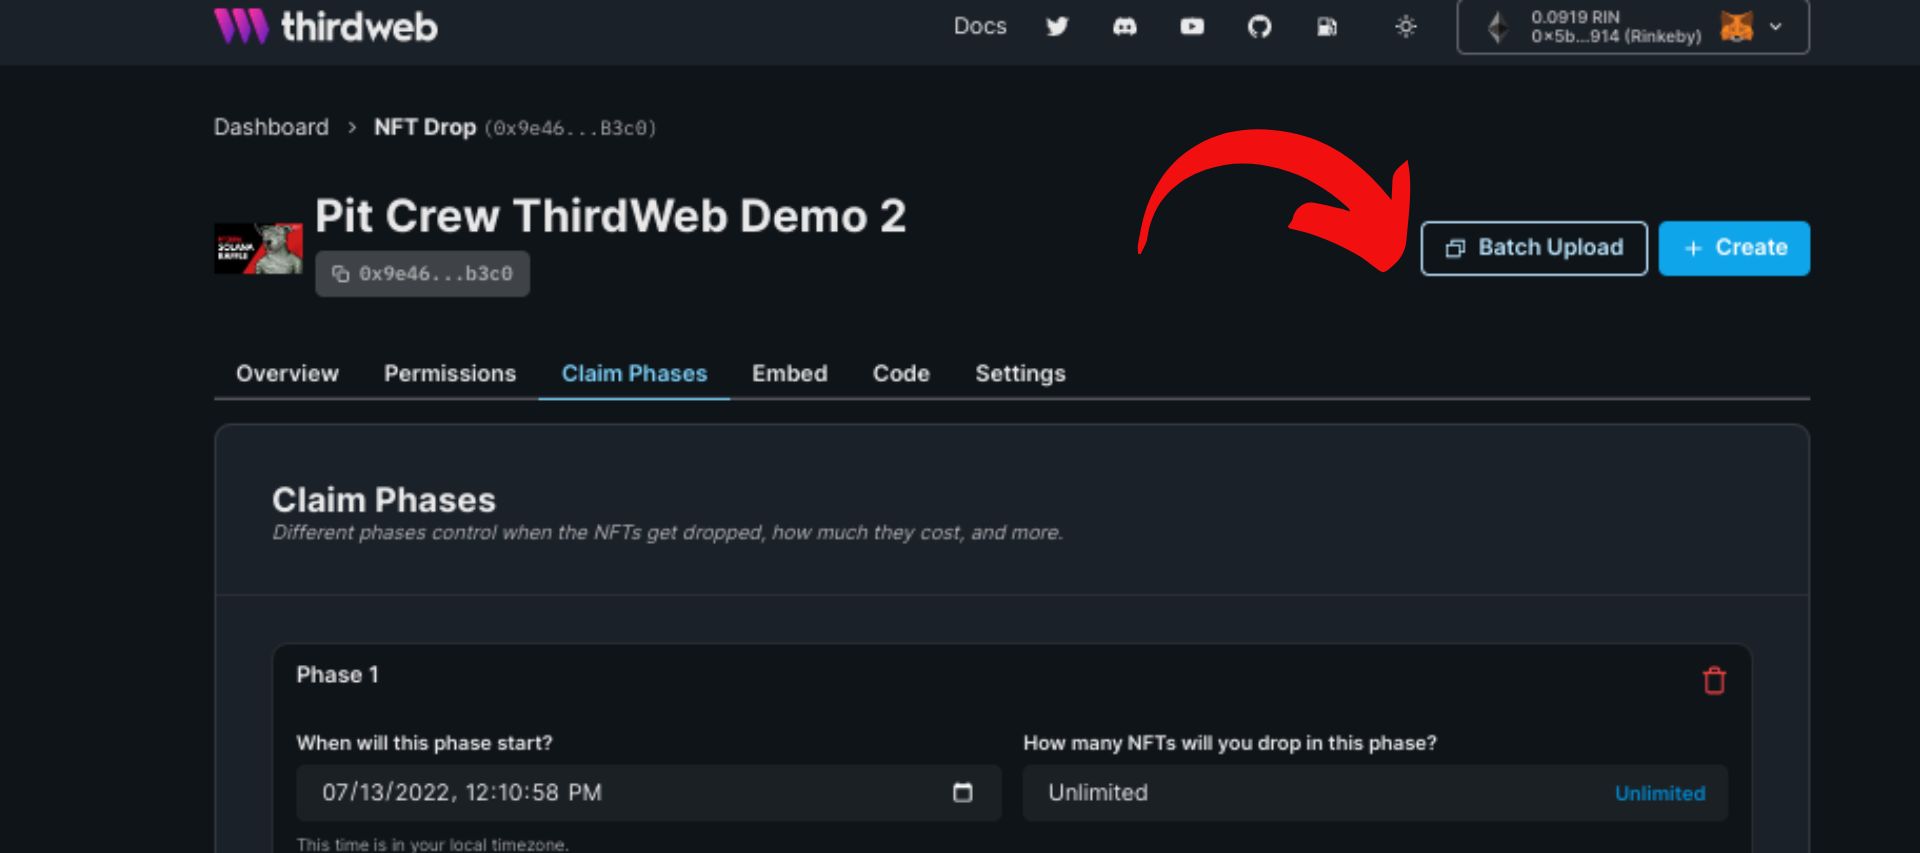 Once you have your nft images and metadata, you can batch upload them into thirdweb